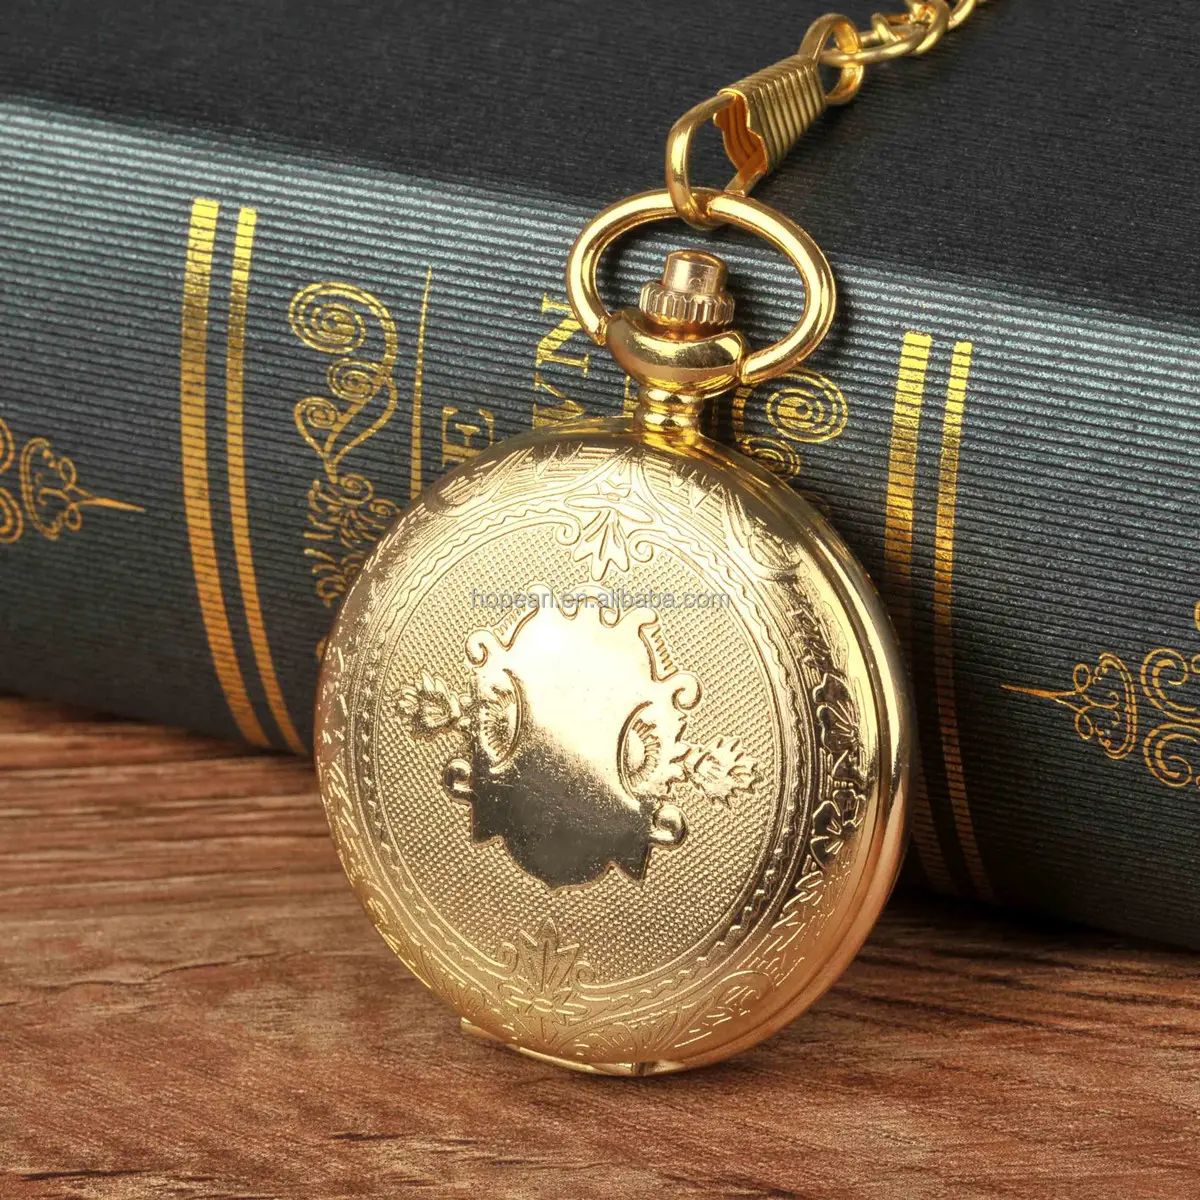 WAH426 Gold Plated Shield Pocket Quartz Watch on Chain with Engraved Flowers